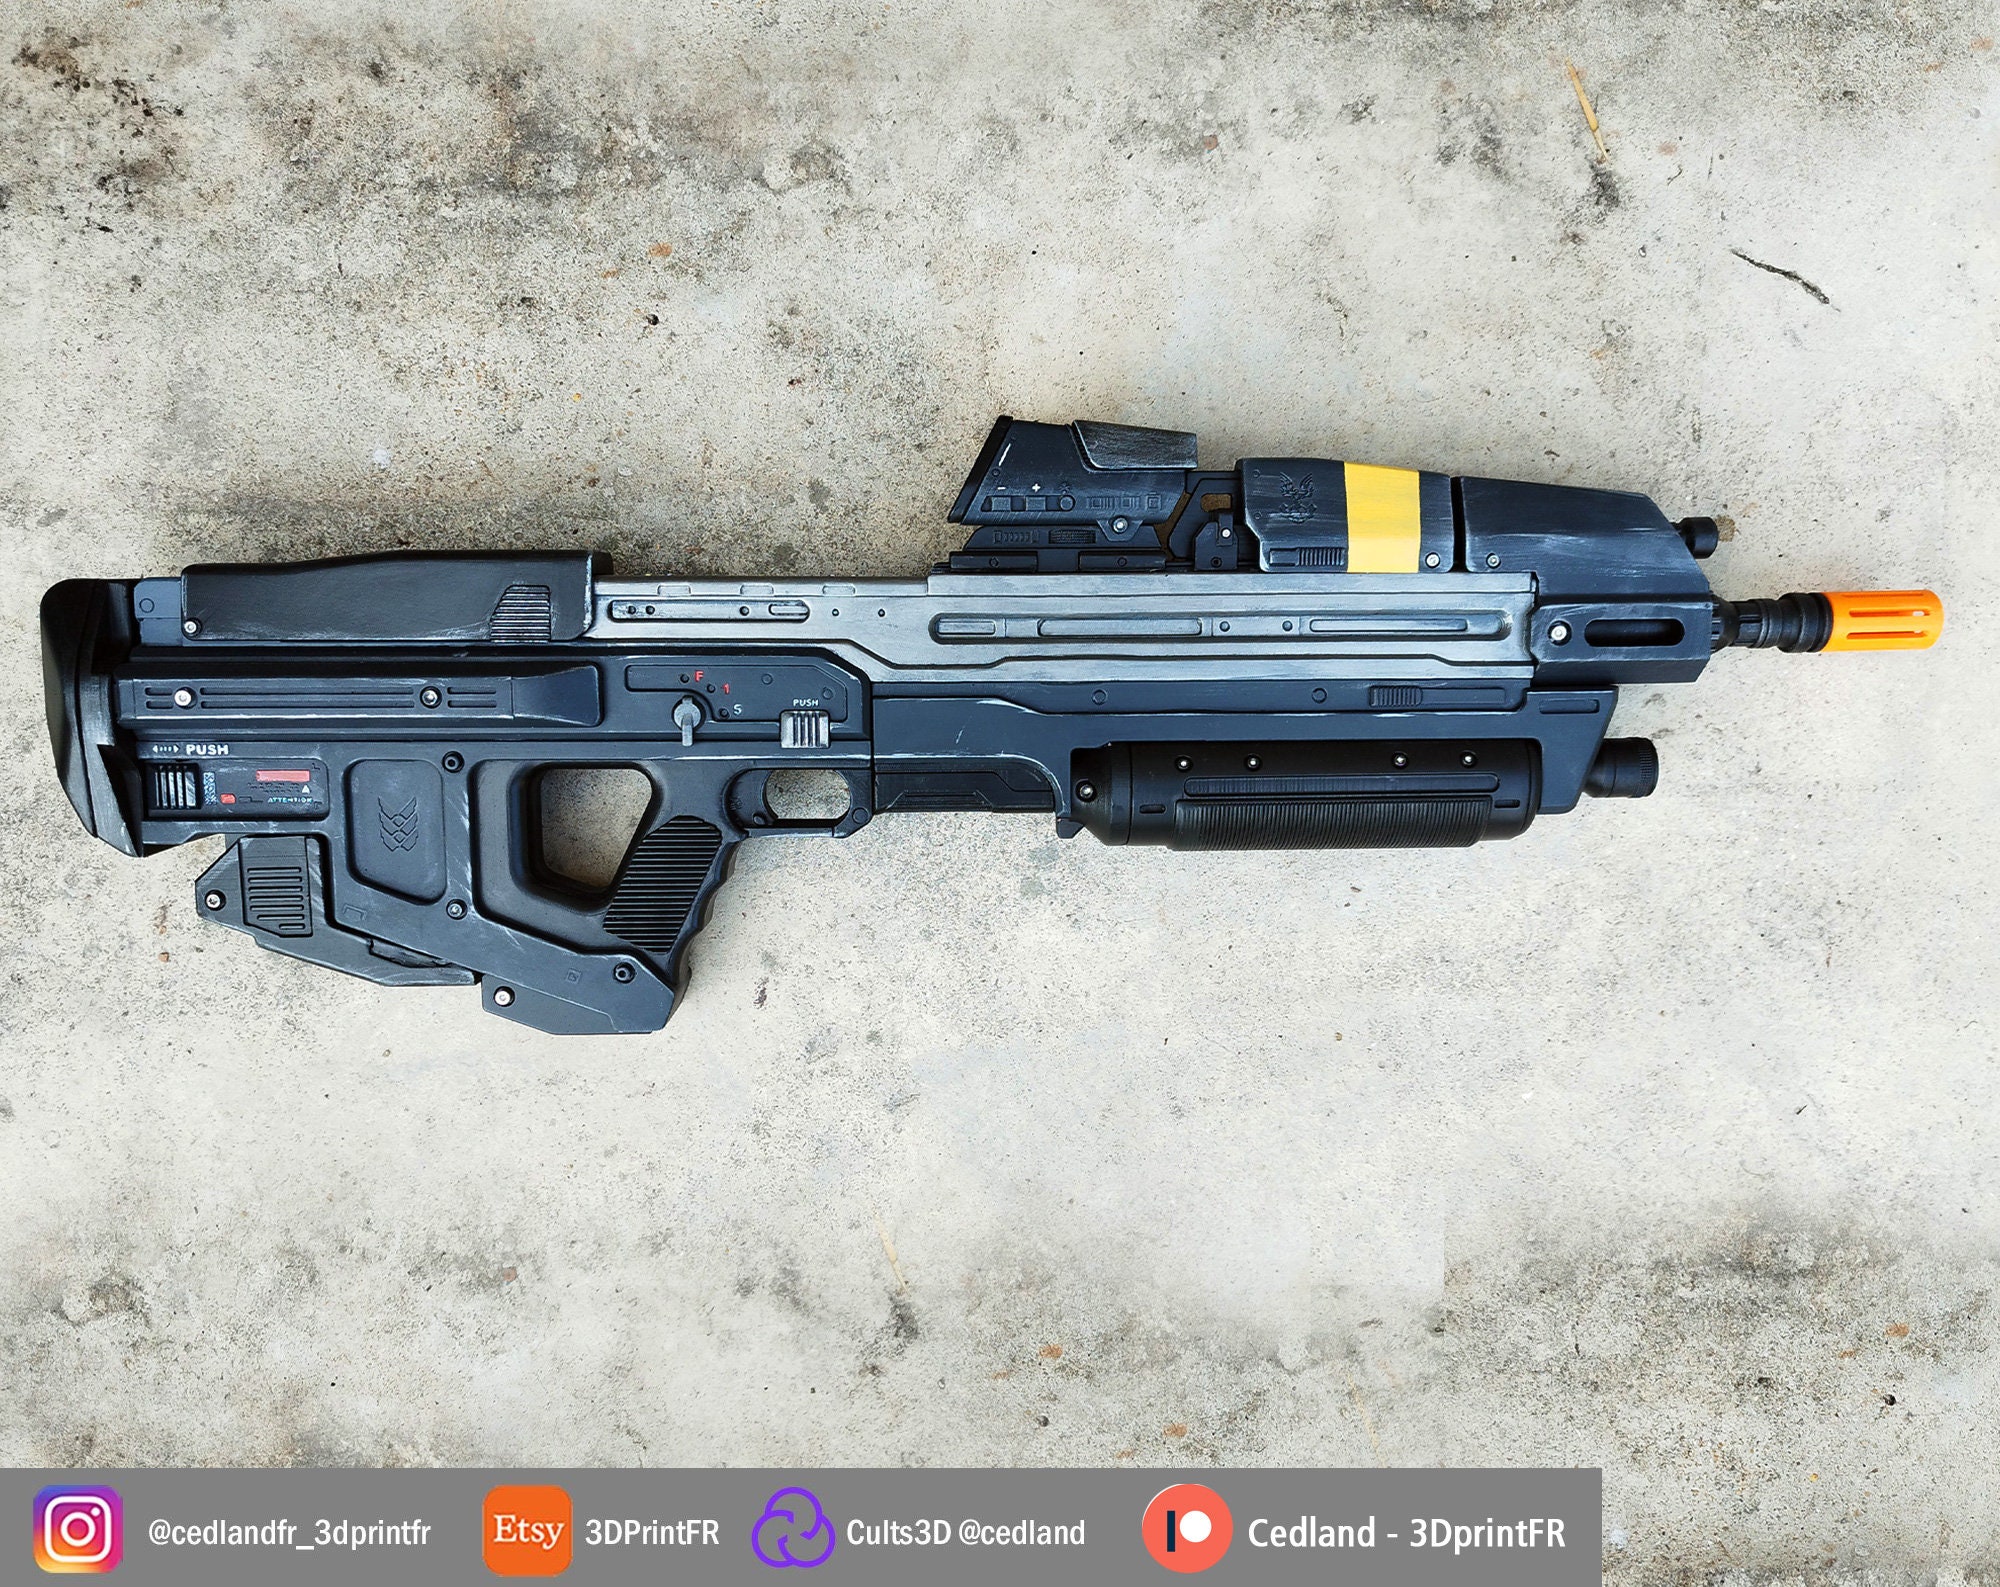 Halo MA-40 Nerf Blaster for LARP or Cosplay 